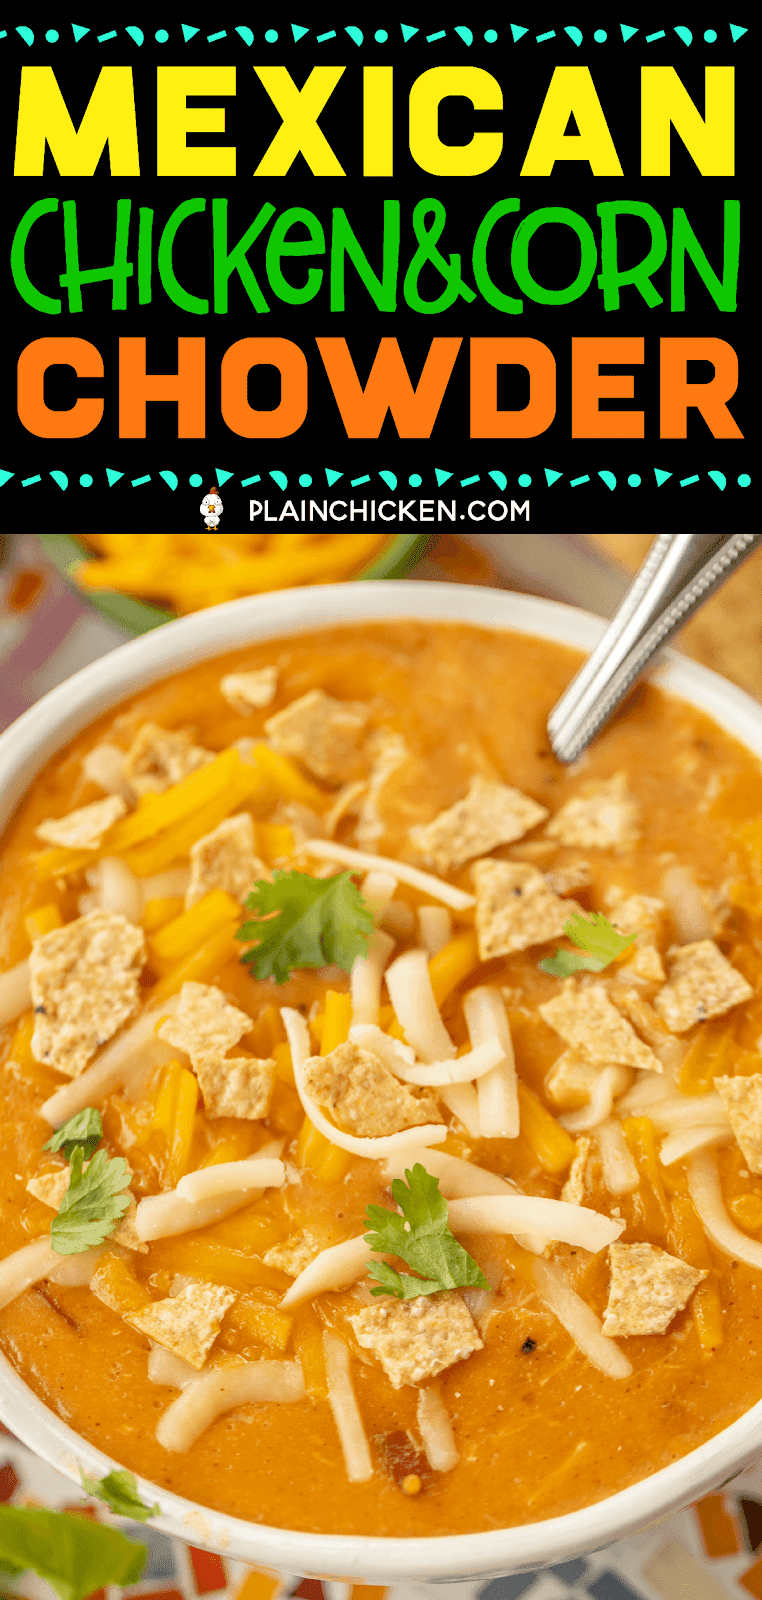 Mexican Chicken Corn Chowder - so simple and delicious!! Ready in about 30 minutes!! Chicken, creamed corn, diced tomatoes and green chiles, cumin, onion, garlic, chicken broth, half-and-half and cheese. SO creamy and delicious! Everyone went back for seconds. Such a quick and easy weeknight meal! #soup #chicken #mexican #30minutemeal #easydinner